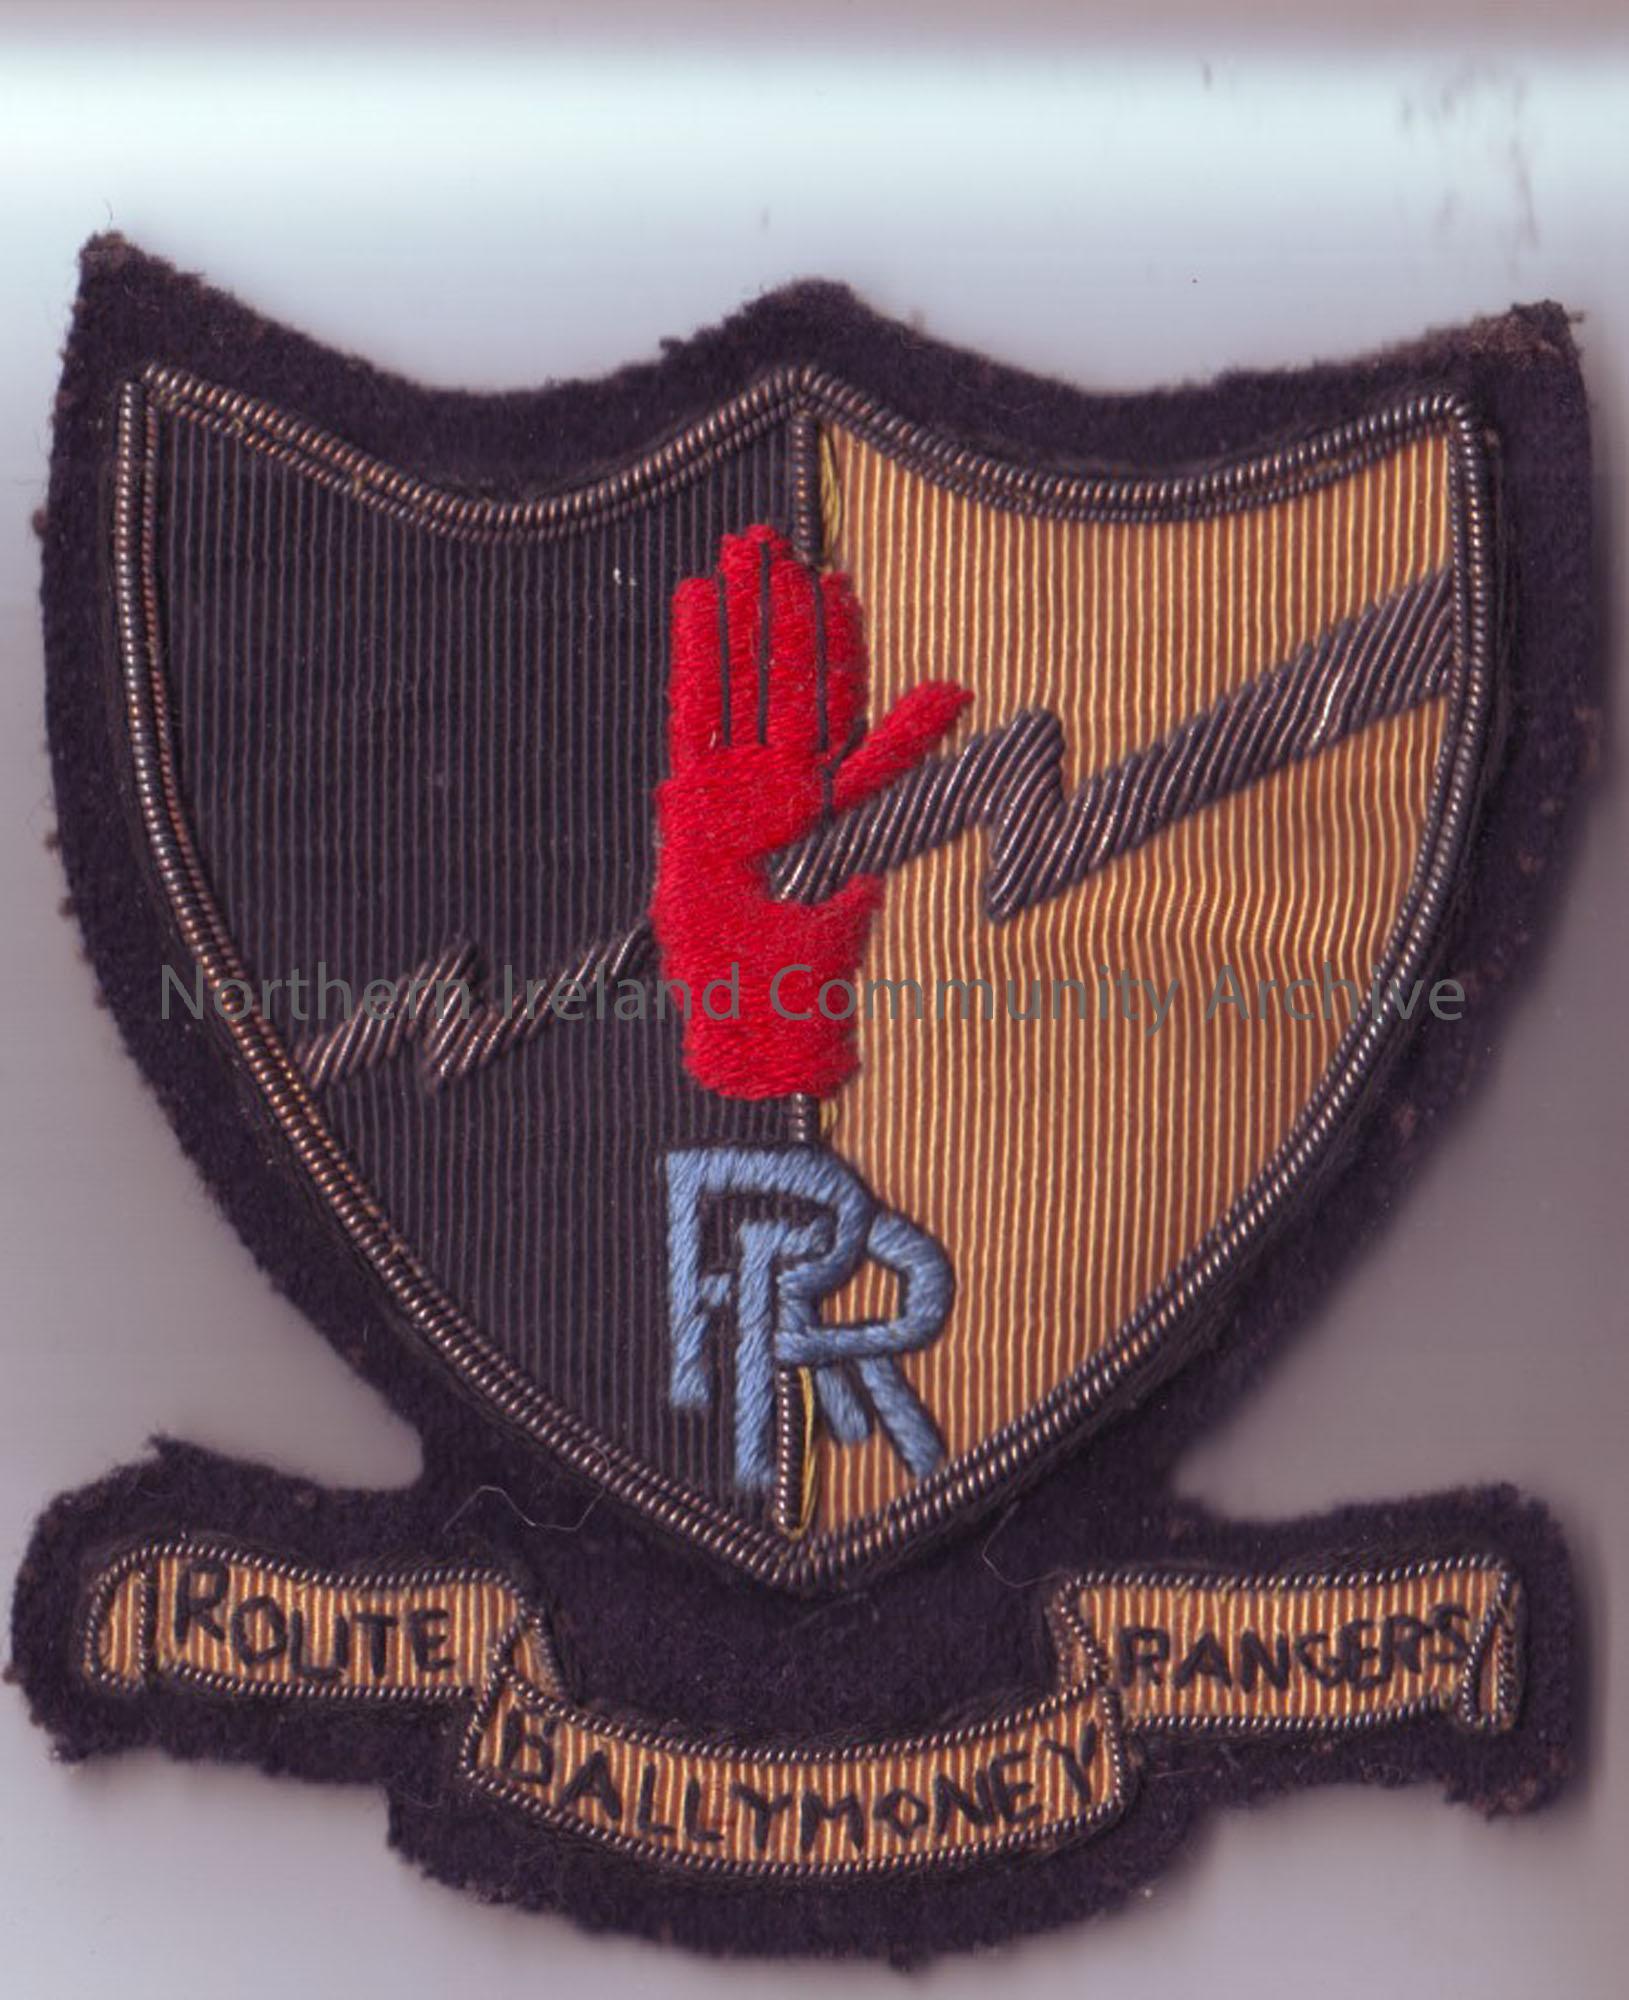 Embroidered badge of “Route Ballymoney Rangers.” Badge is a shield shape with a half black and half yellow background. In the middle of the shield is …